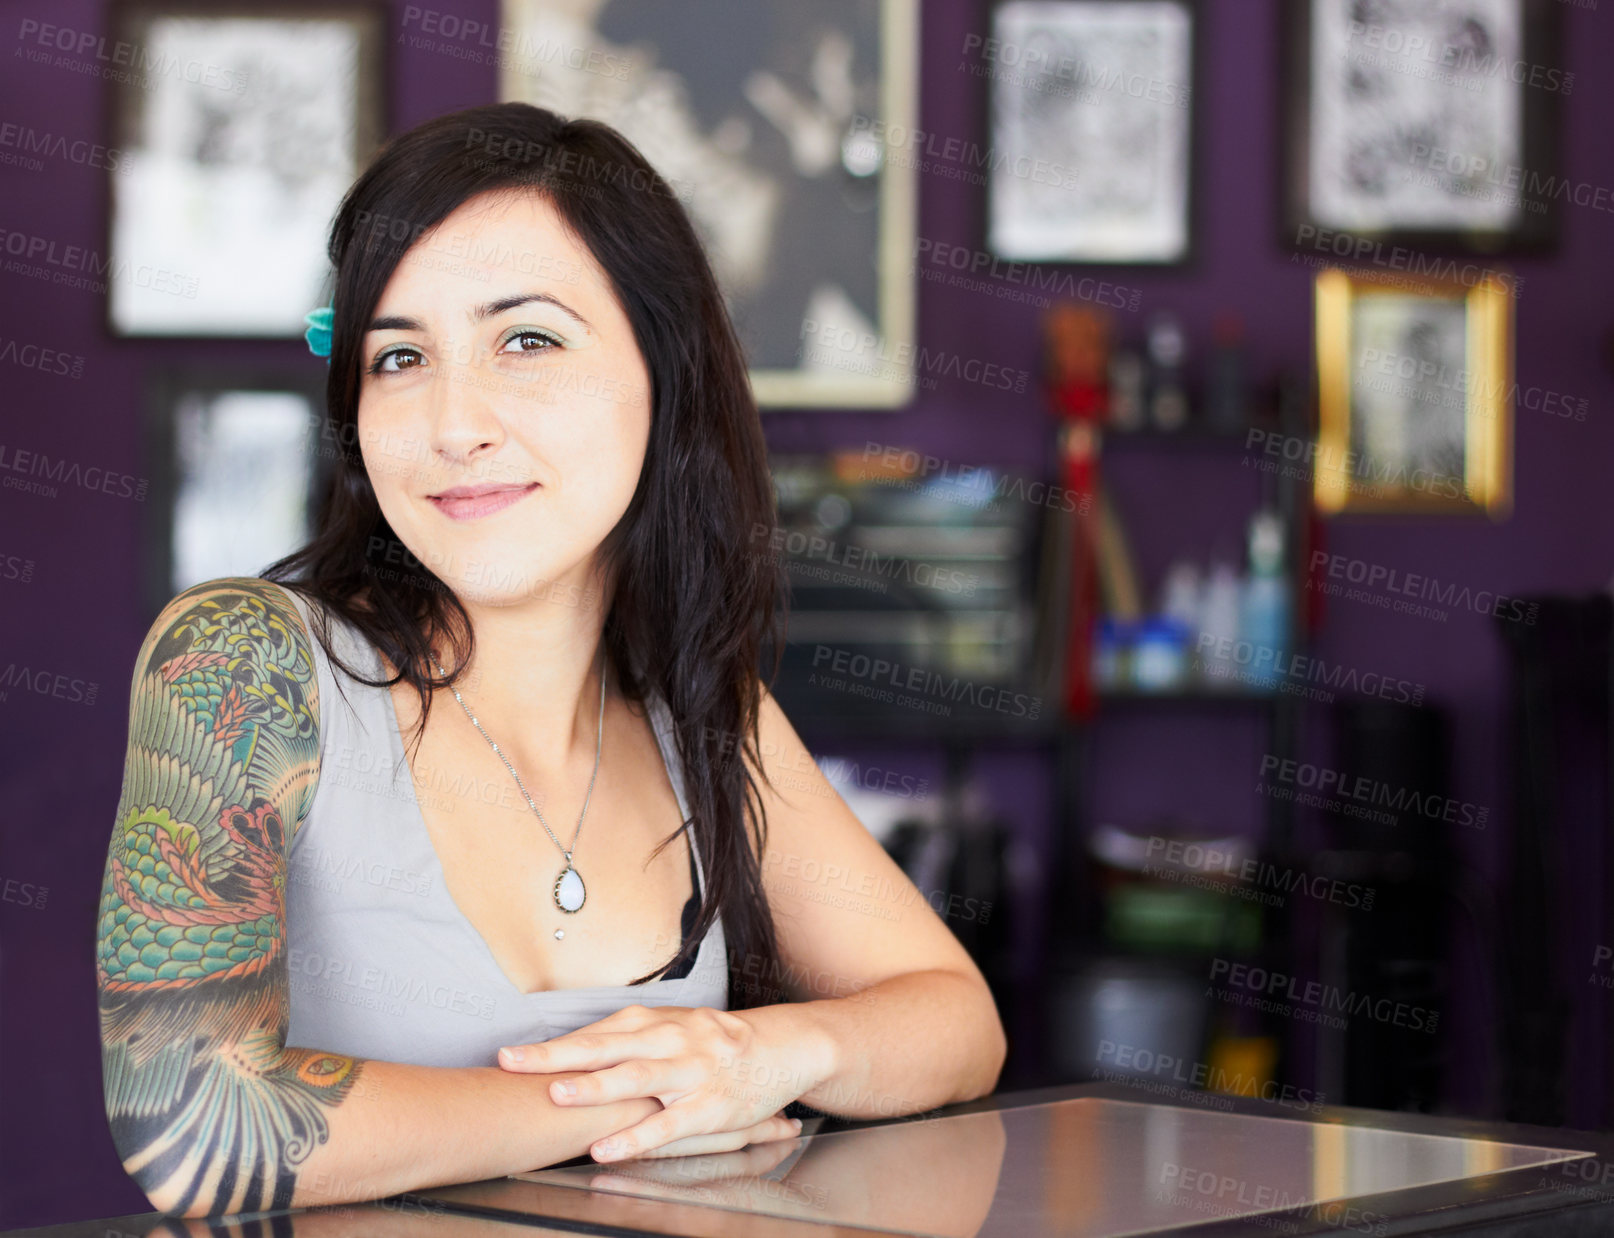 Buy stock photo Tattoos, portrait or woman with arm sleeve of art design, edgy or unique creative style in a shop. Identity, tattoo artist or cool female person with funky ink on skin for creativity or expression 